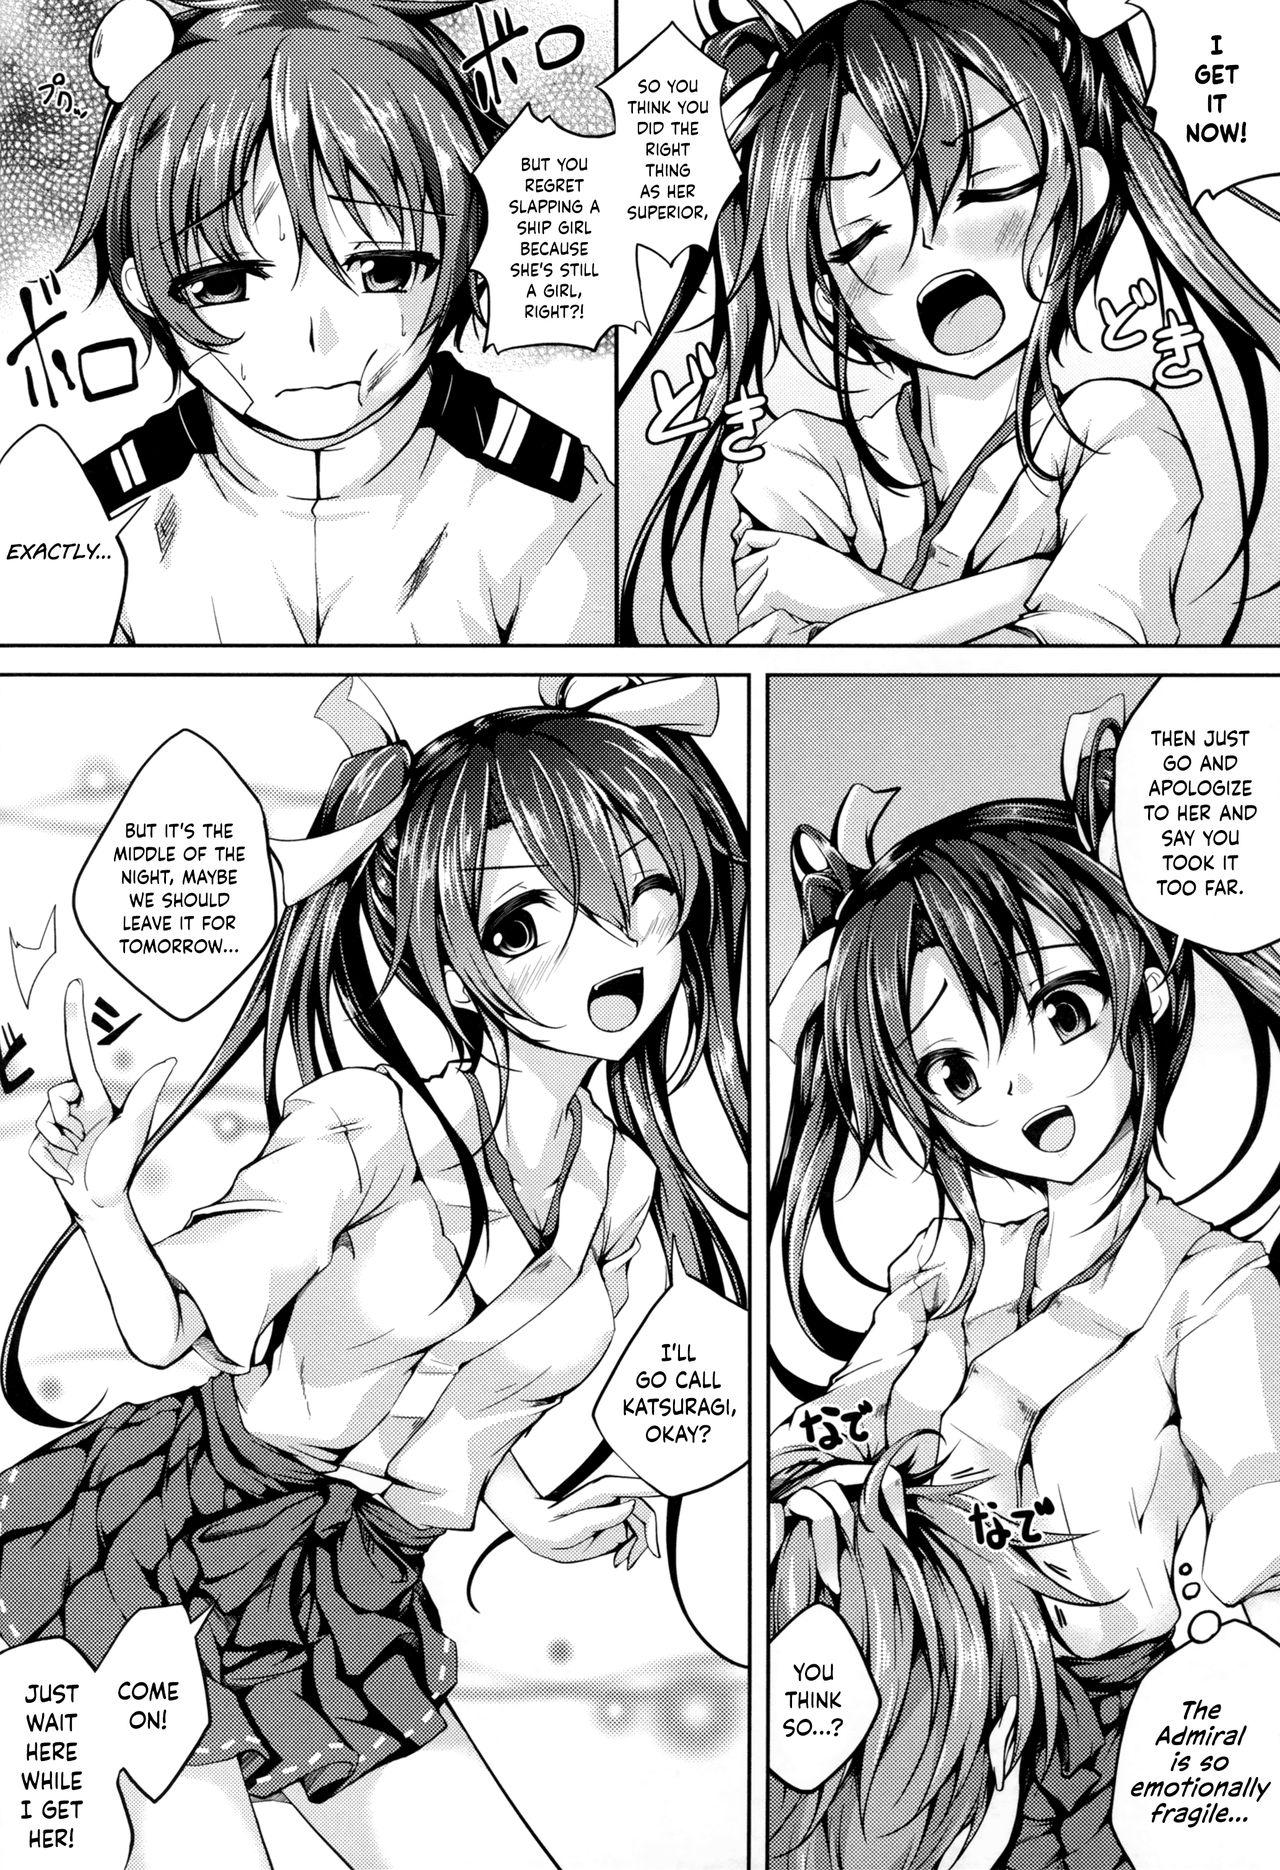 Blow Koiiro Moyou 13 - Kantai collection Ex Girlfriends - Page 8